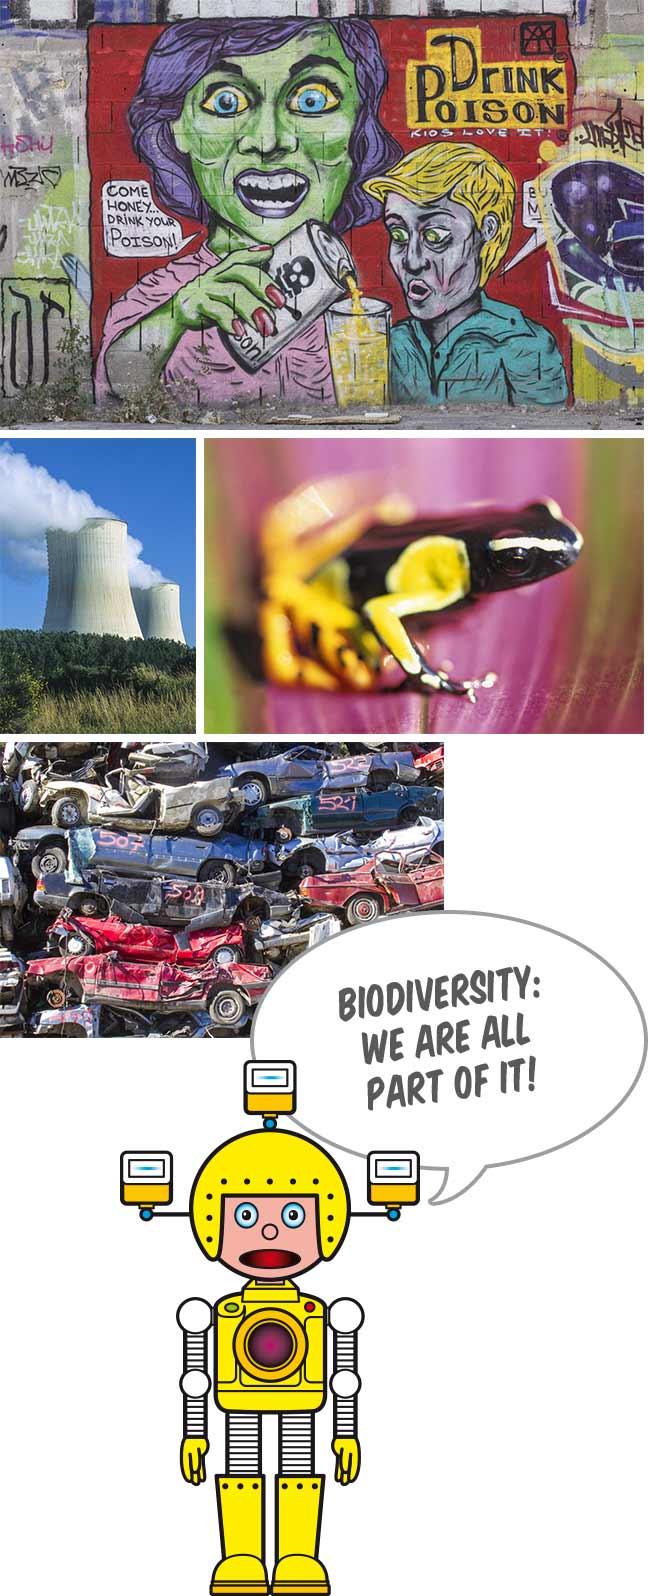 Biodiversity: we are all part of it